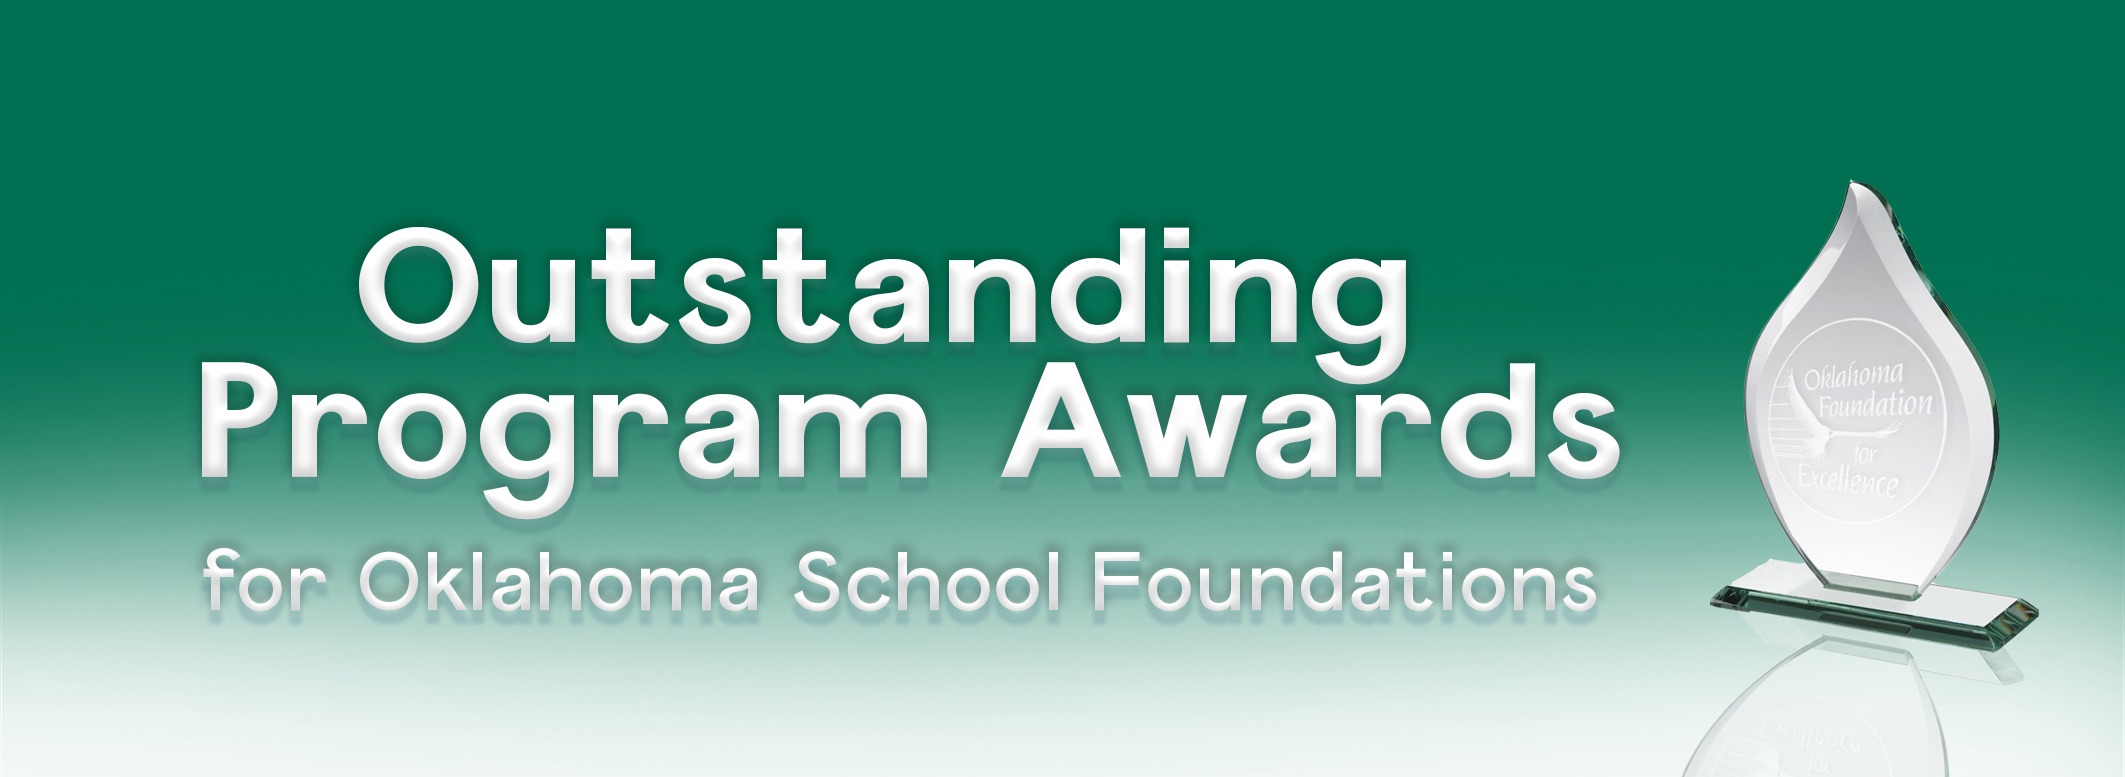 Three Public School Foundation Programs to be Recognized for Outstanding Achievement